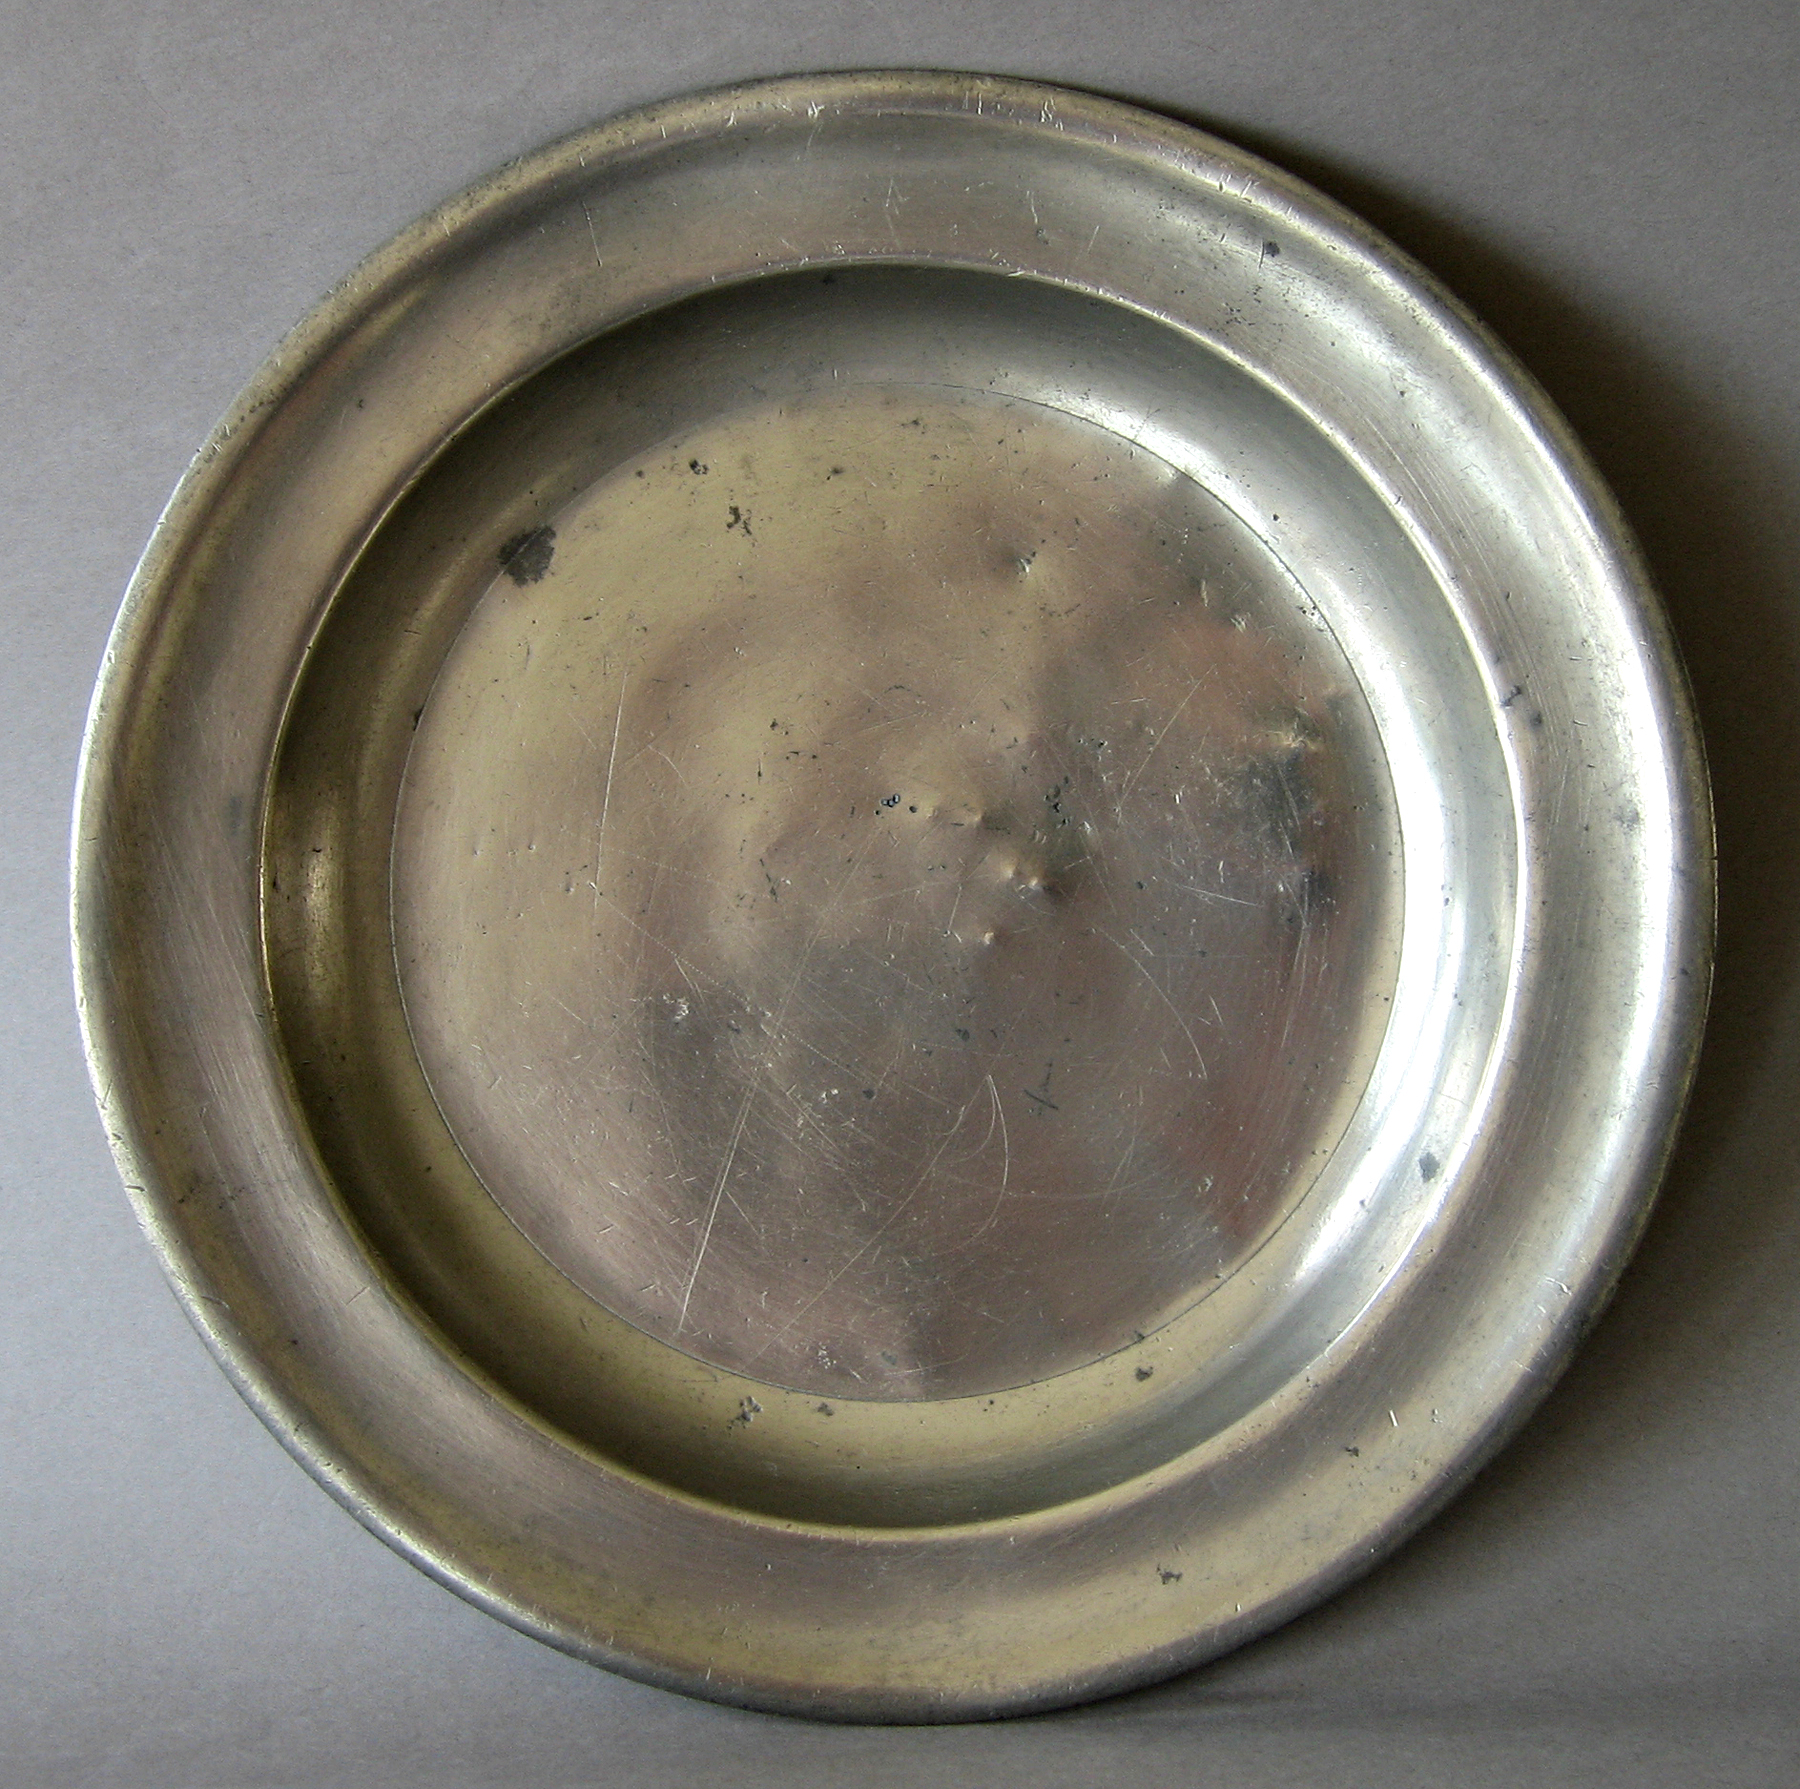 1952.0113 Pewter plate